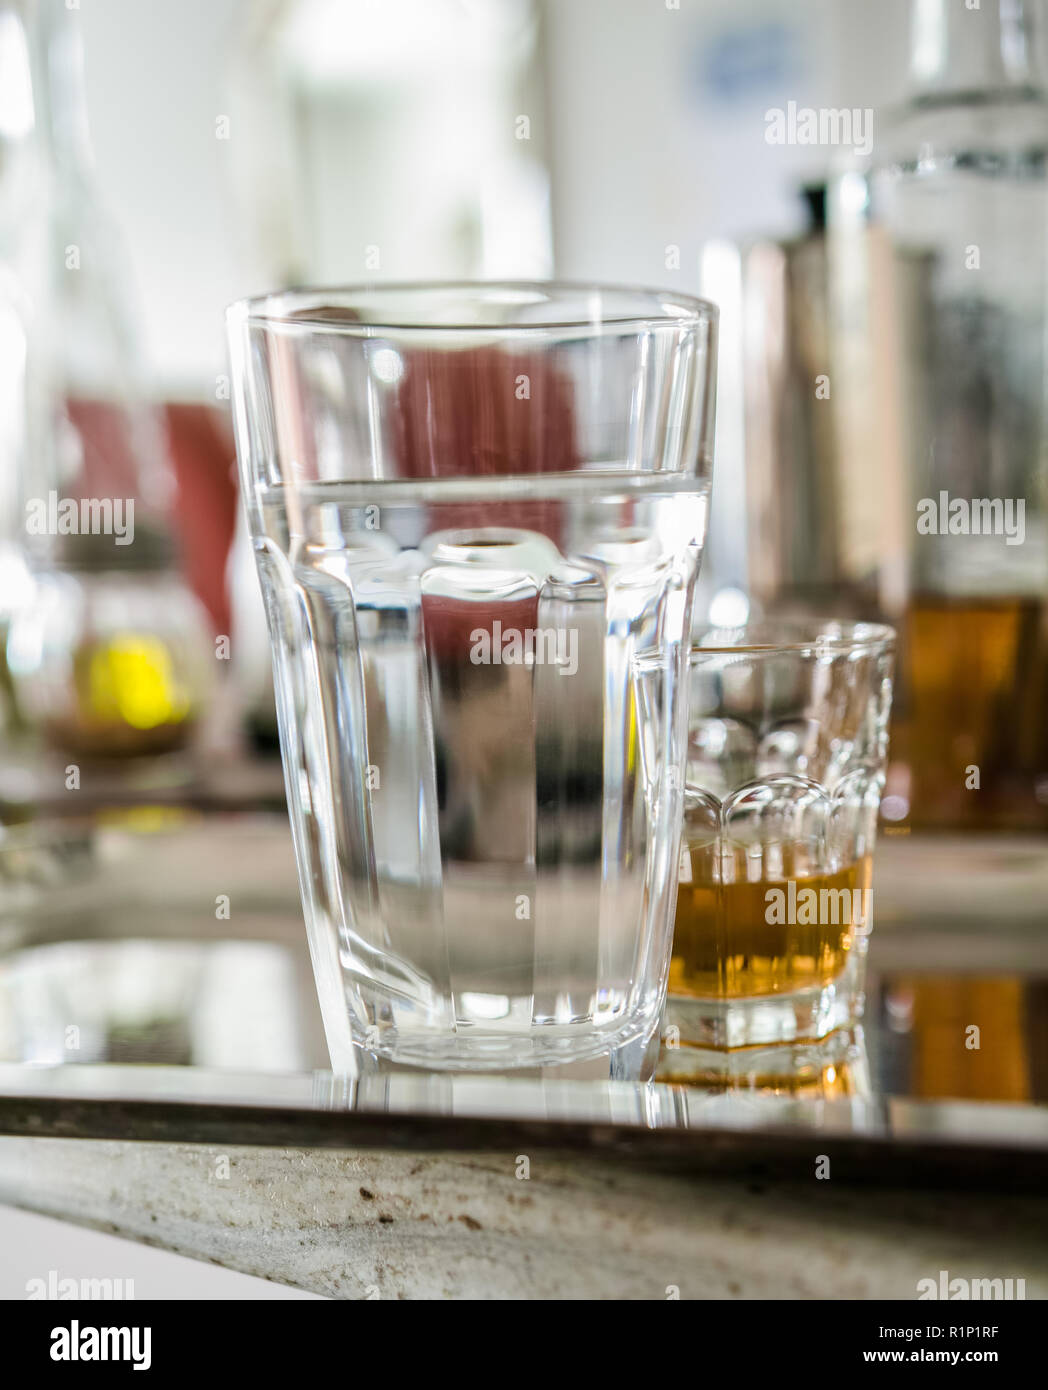 After the party, on the kitchen counter, a glass of alcohol and a large glass of water remain on the tray. Stock Photo